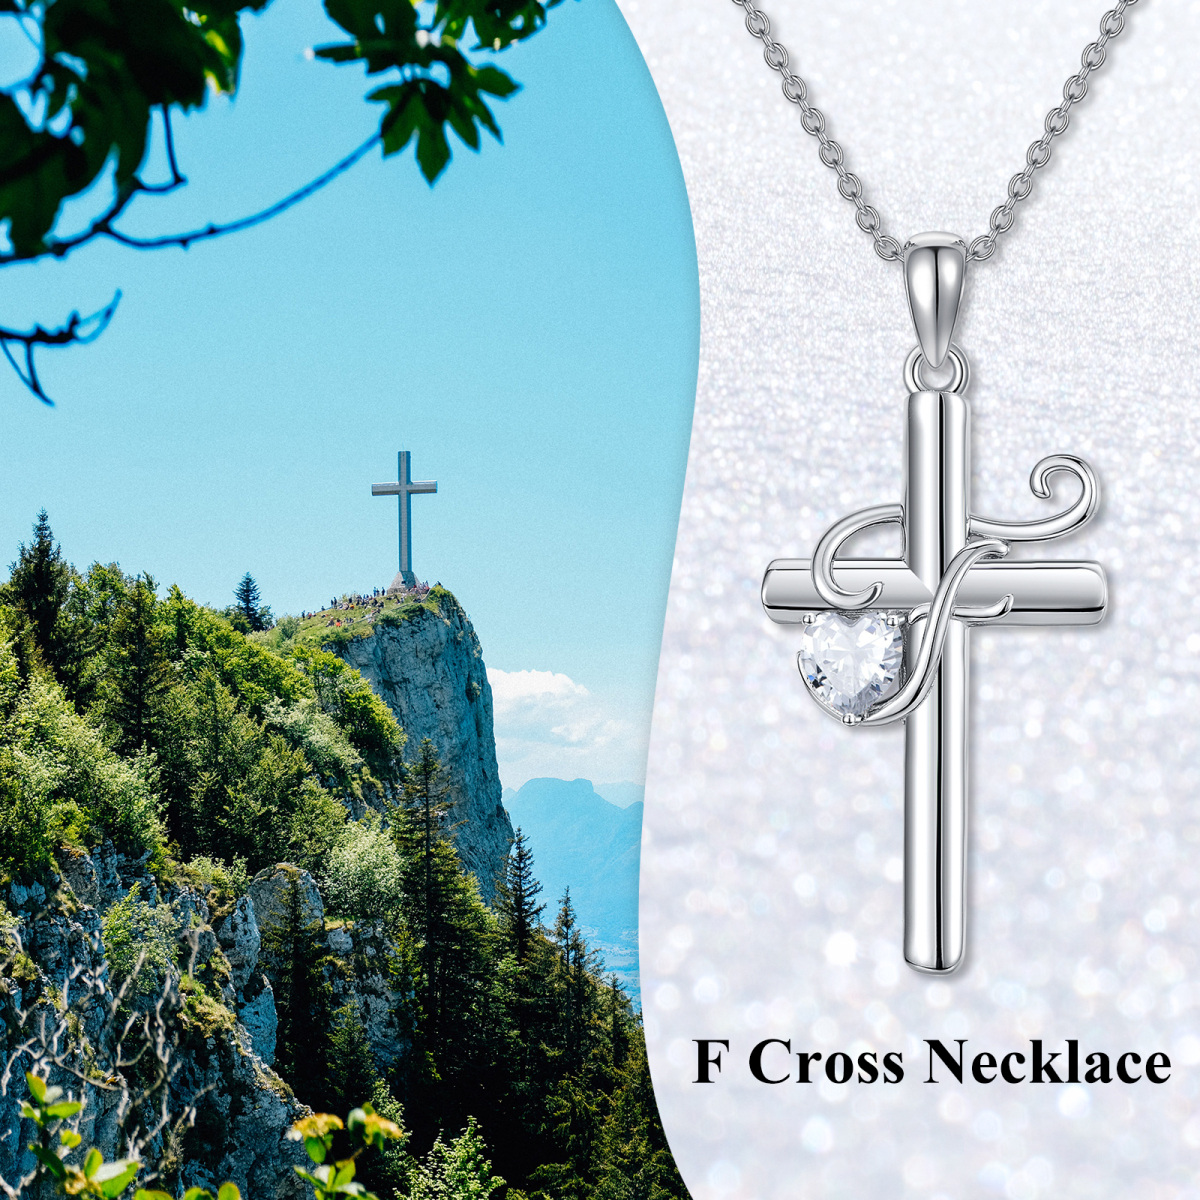 Sterling Silver Heart Shaped Cubic Zirconia Cross Pendant Necklace with Initial Letter F-6